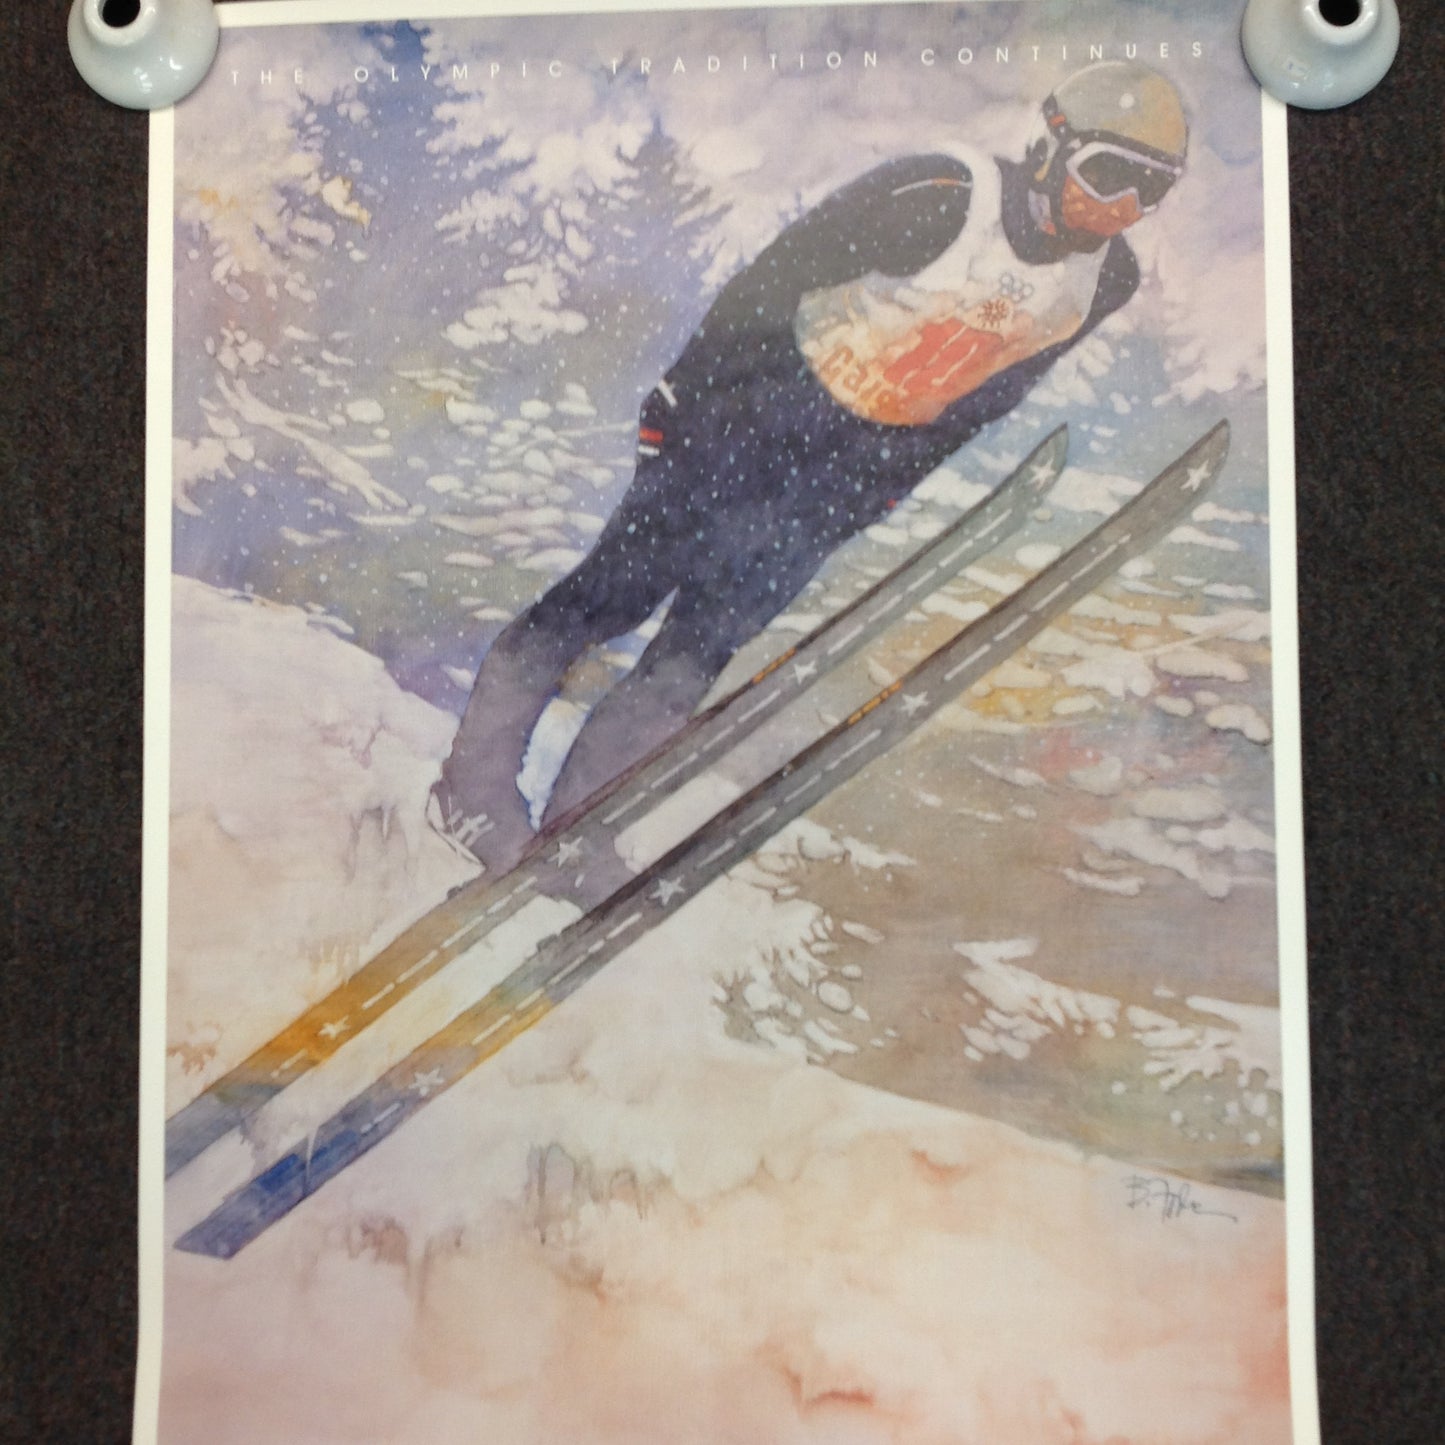 Vintage 1987 ABC Calgary 88 XV Winter Olympics The Tradition Continues Ski Jumper Skiing Jump Embossed